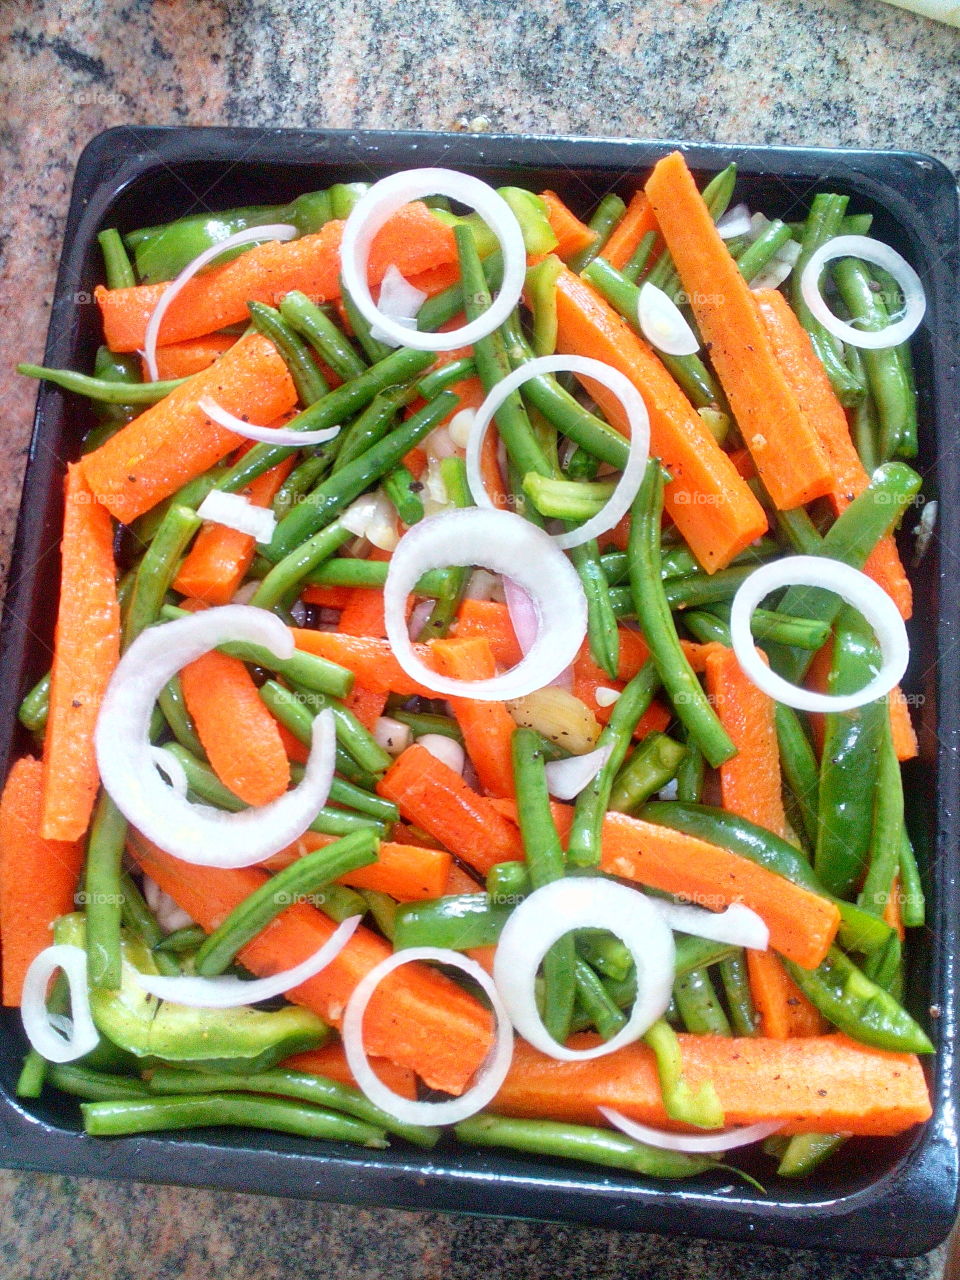 Carrot and French bean salad!